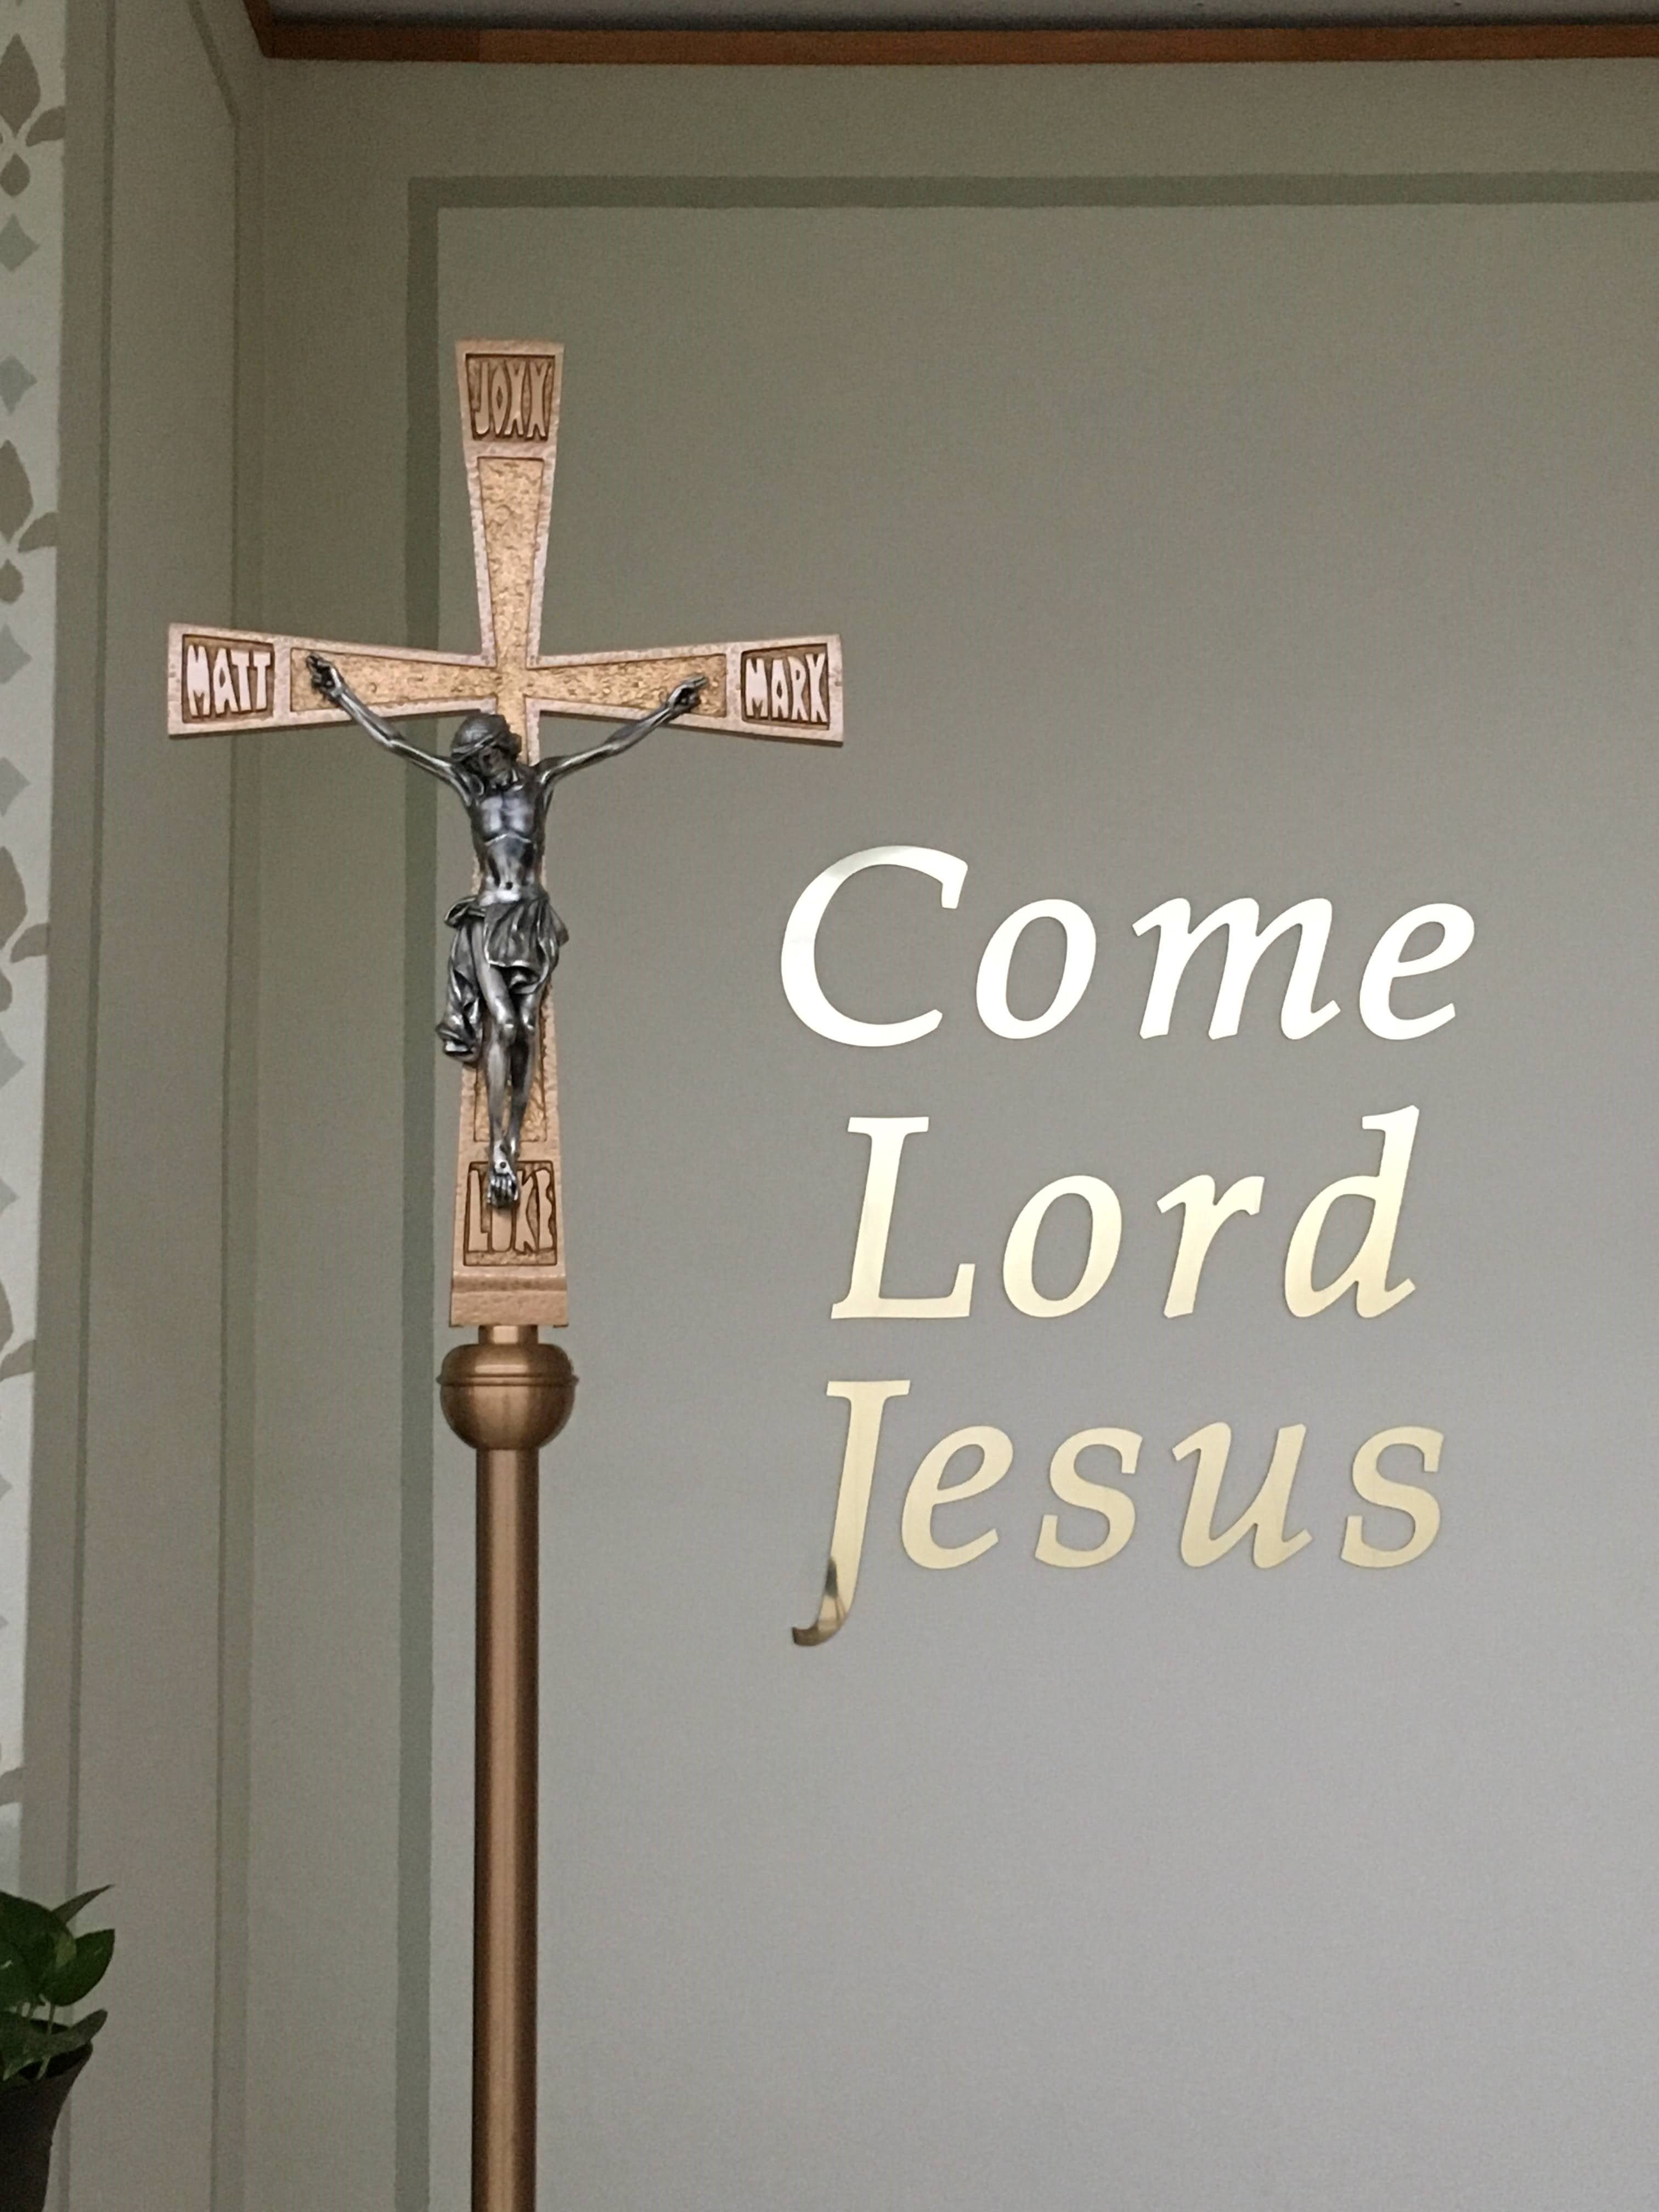 Crucifix with the phrase "Come Lord Jesus" in the background